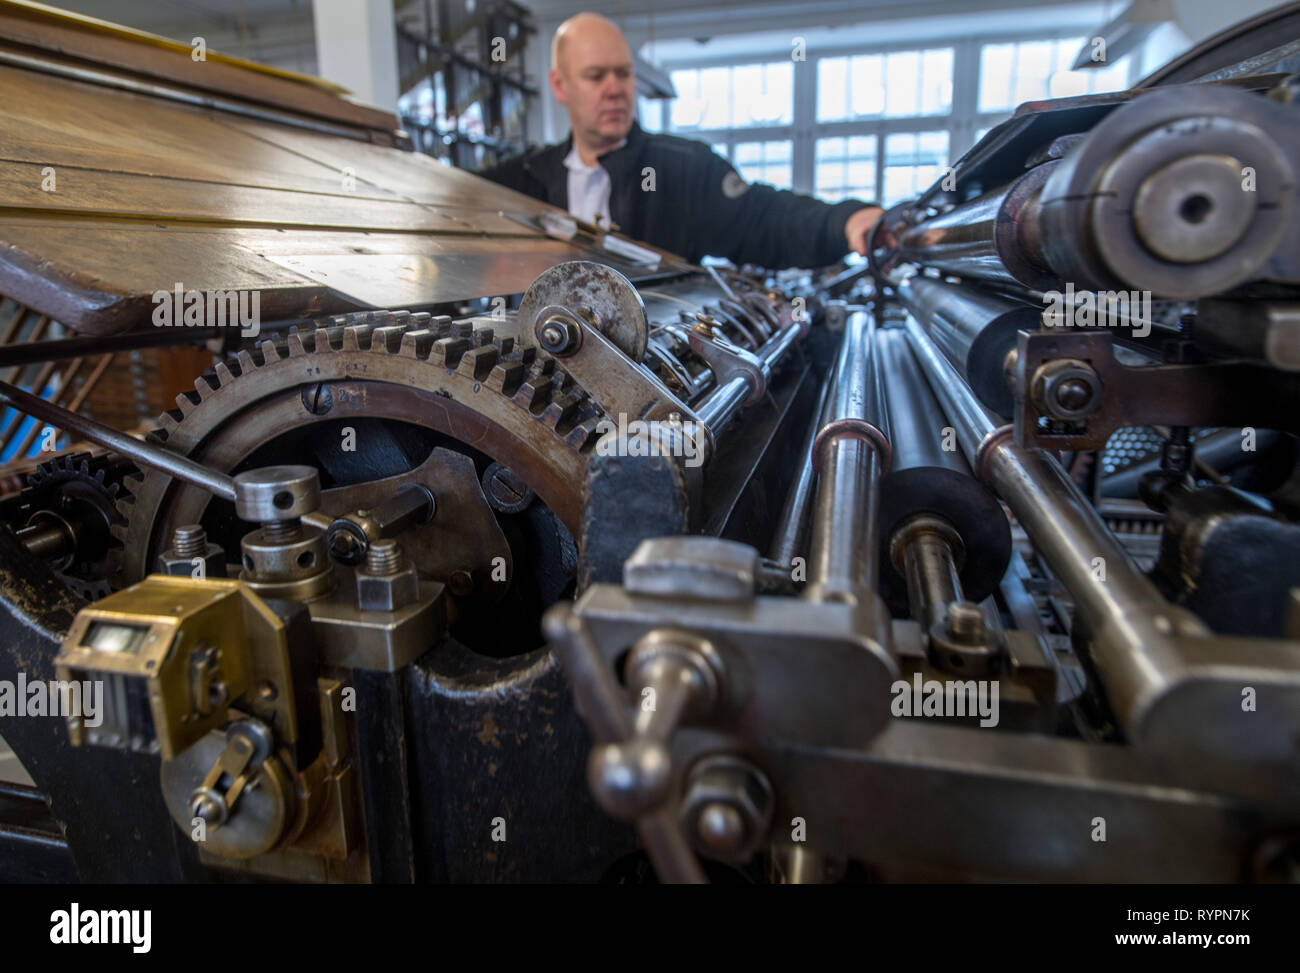 14 March 2019, Saxony, Leipzig: Thomas Kurz, typesetter and employee of the Museum für Druckkunst Leipzig, prints on a letterpress from 1906. The rooms of the historic printing workshop breathe 500 years of printing history with about 100 functioning machines and presses for historical casting, typesetting and printing techniques. On Friday (15.03.2019), the museum will participate in the first nationwide Print Art Day and offer a colourful programme. On 15 March last year, the artistic printing techniques were included in the German Unesco Commission's nationwide list of Intangible Cultural H Stock Photo